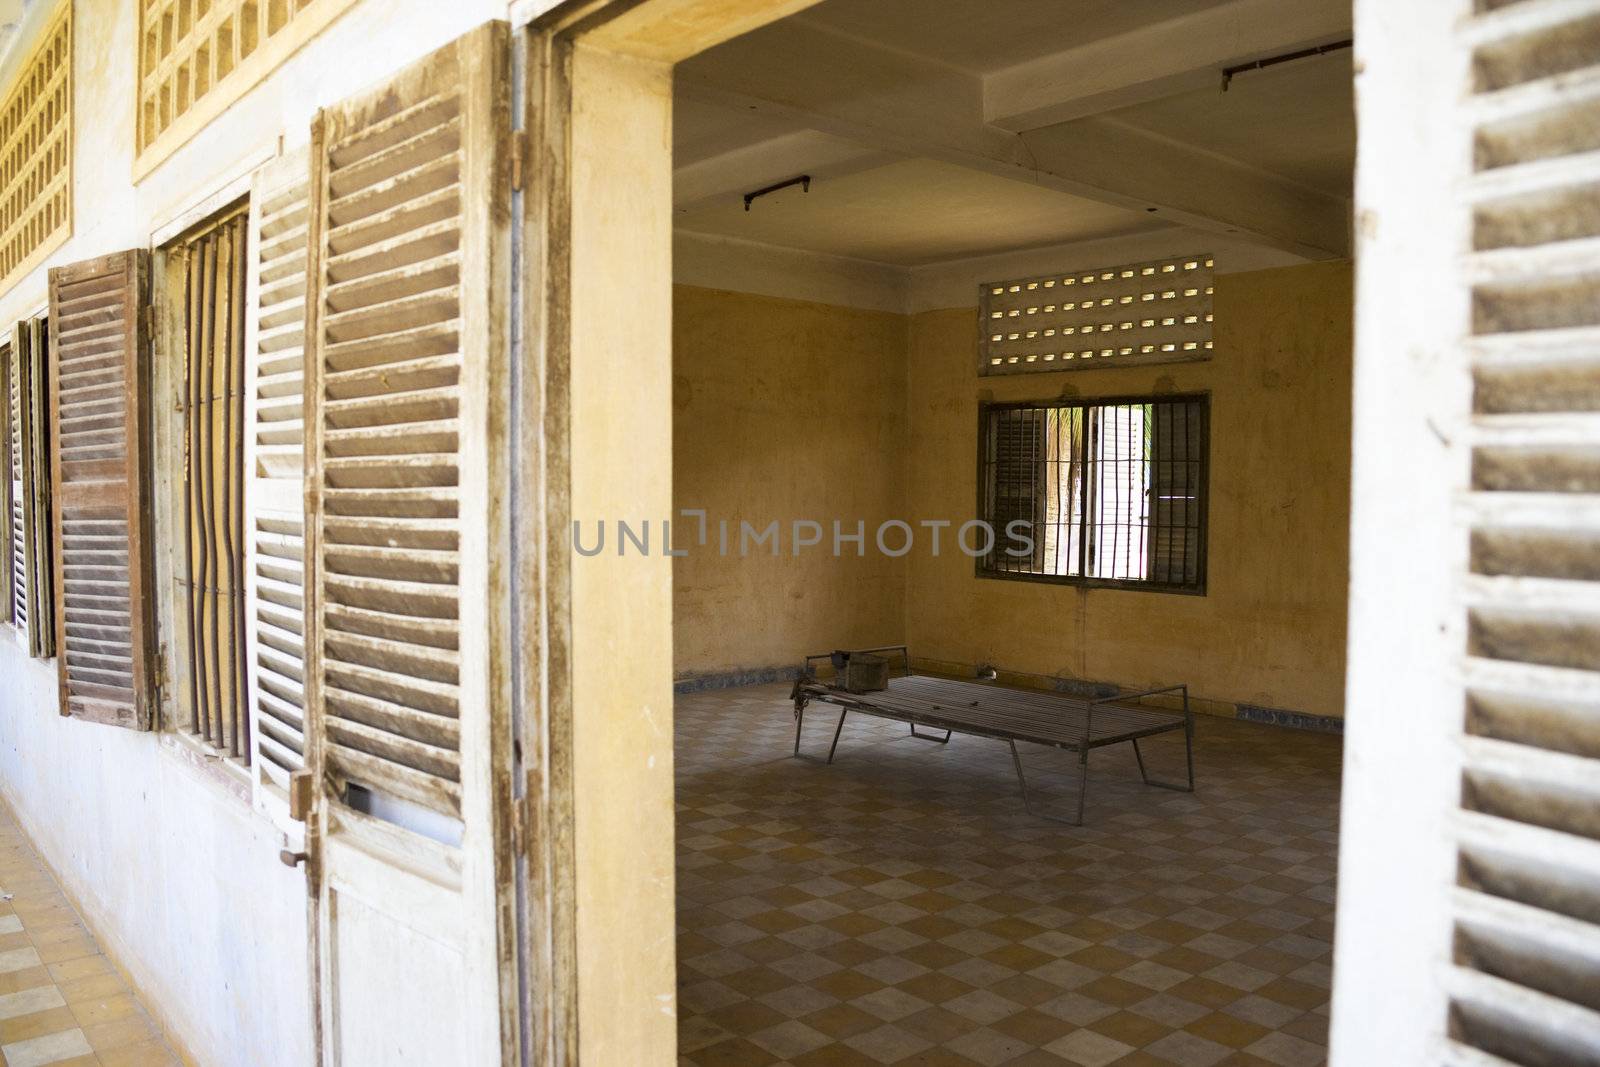 This is the actual room and the bed where many Cambodians were tortured and murdered by the Khmer Rouge. Formerly a school, converted into what was known as the notorious Security Prison 21 (S-21). About 17,000 people were interned here and only 12 survived. Now part of the Tuol Sleng Genocide Museum and it is in the same condition as when it was found by the liberating Vietnamese forces.